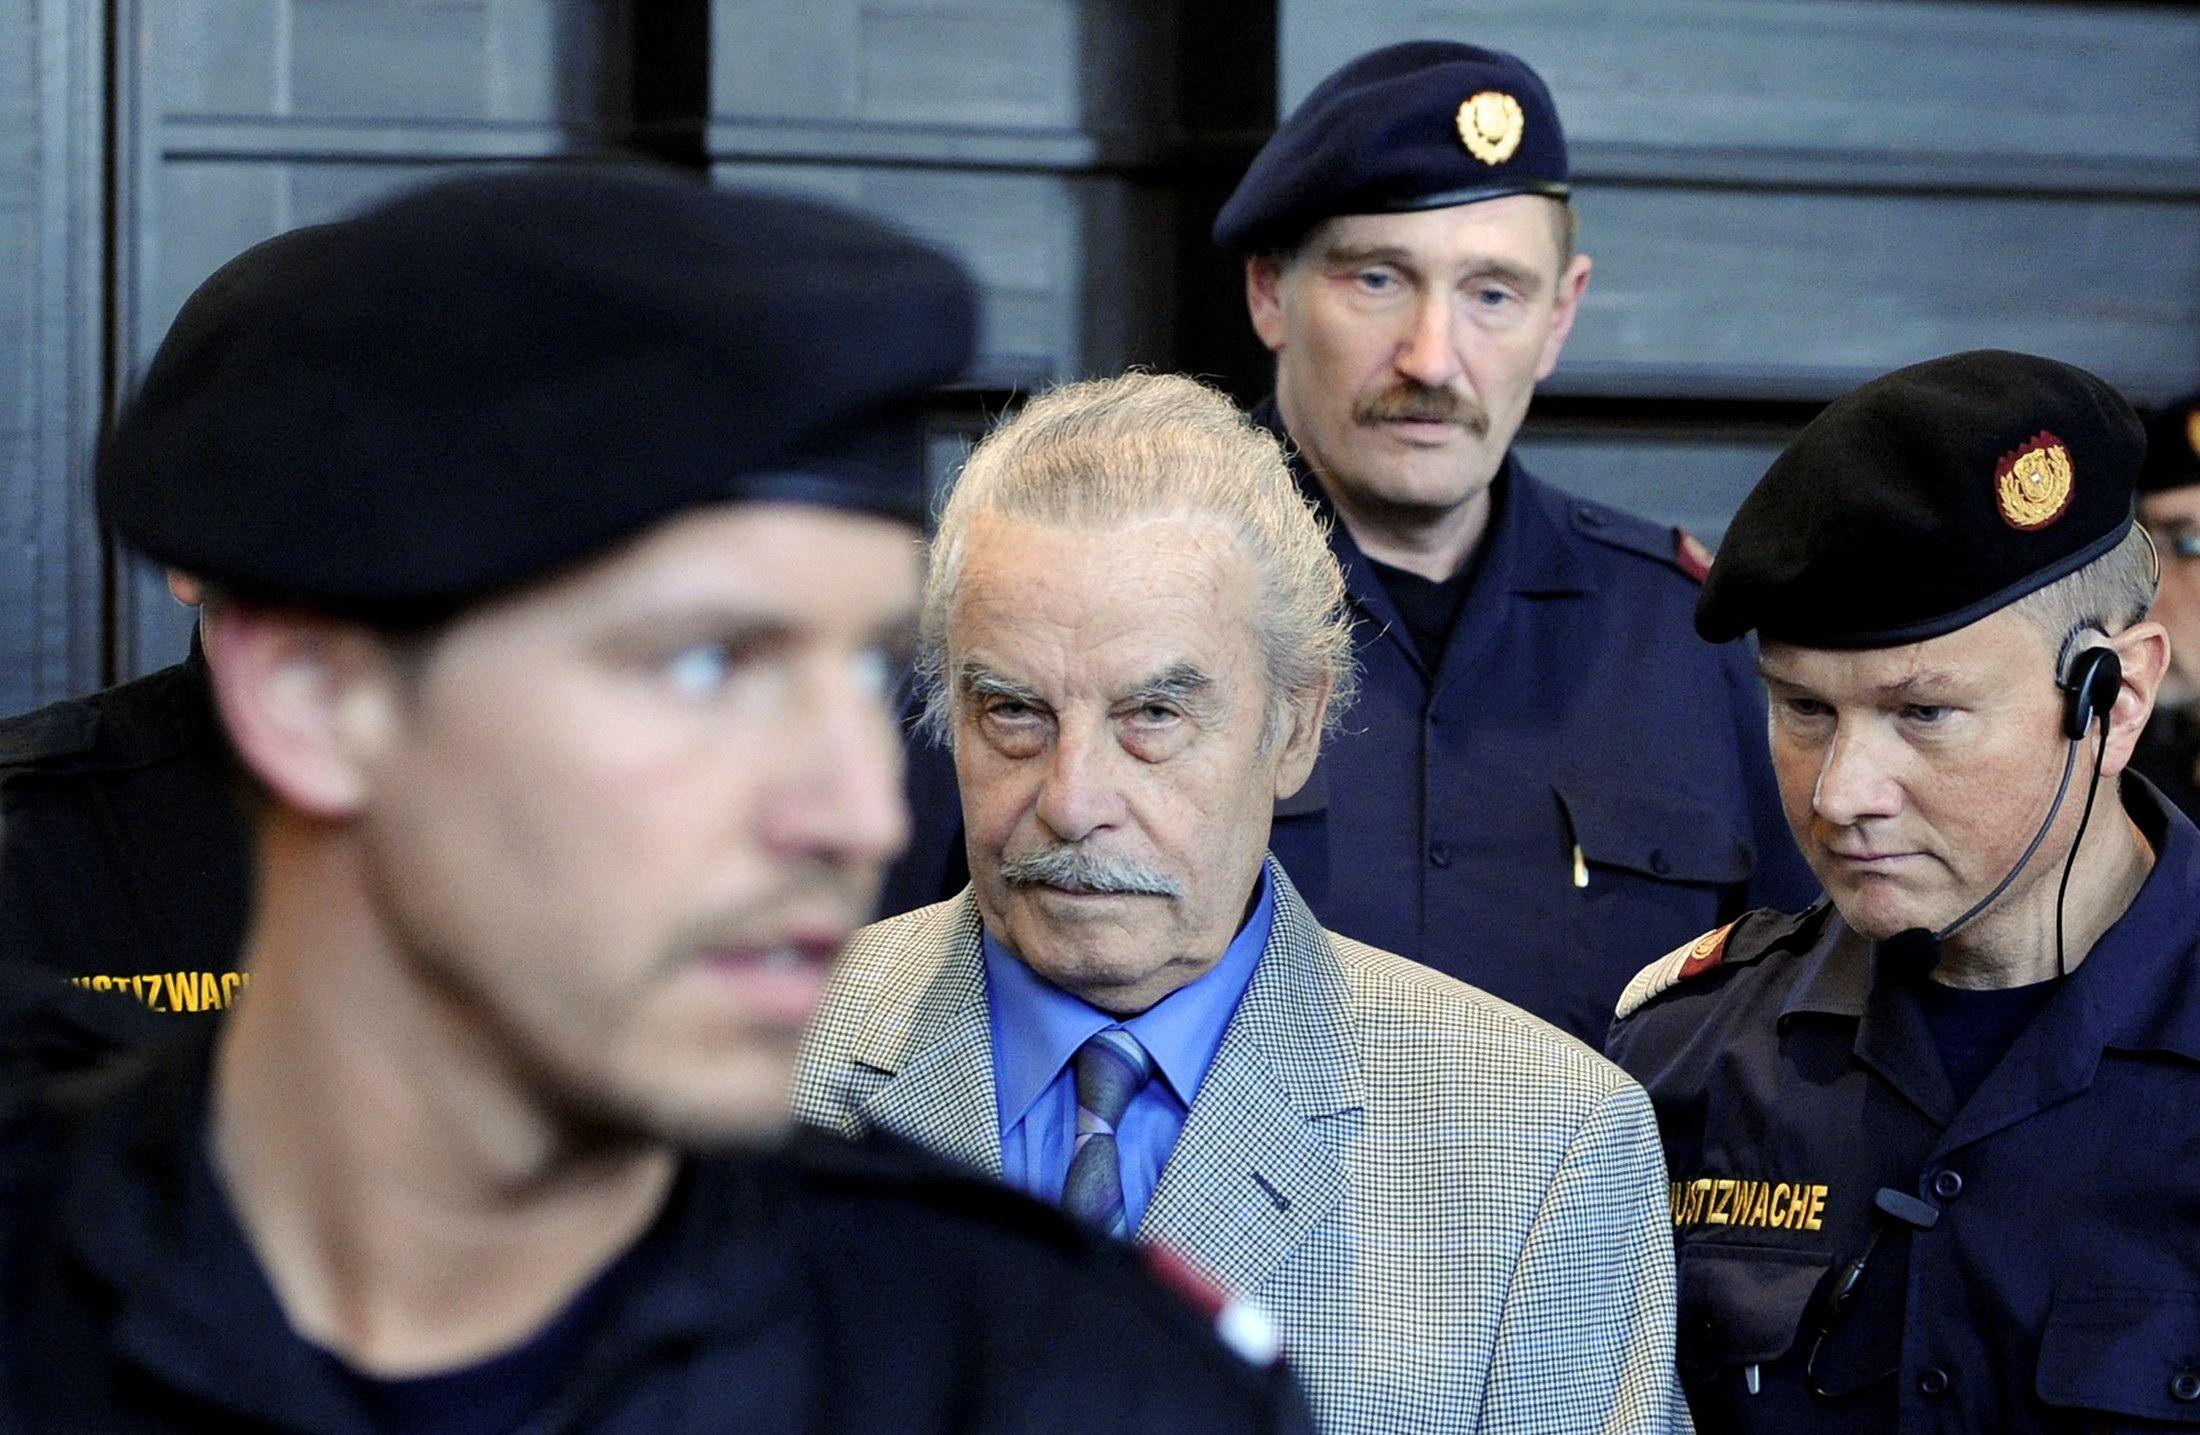 Court rules Josef Fritzl can move to normal prison